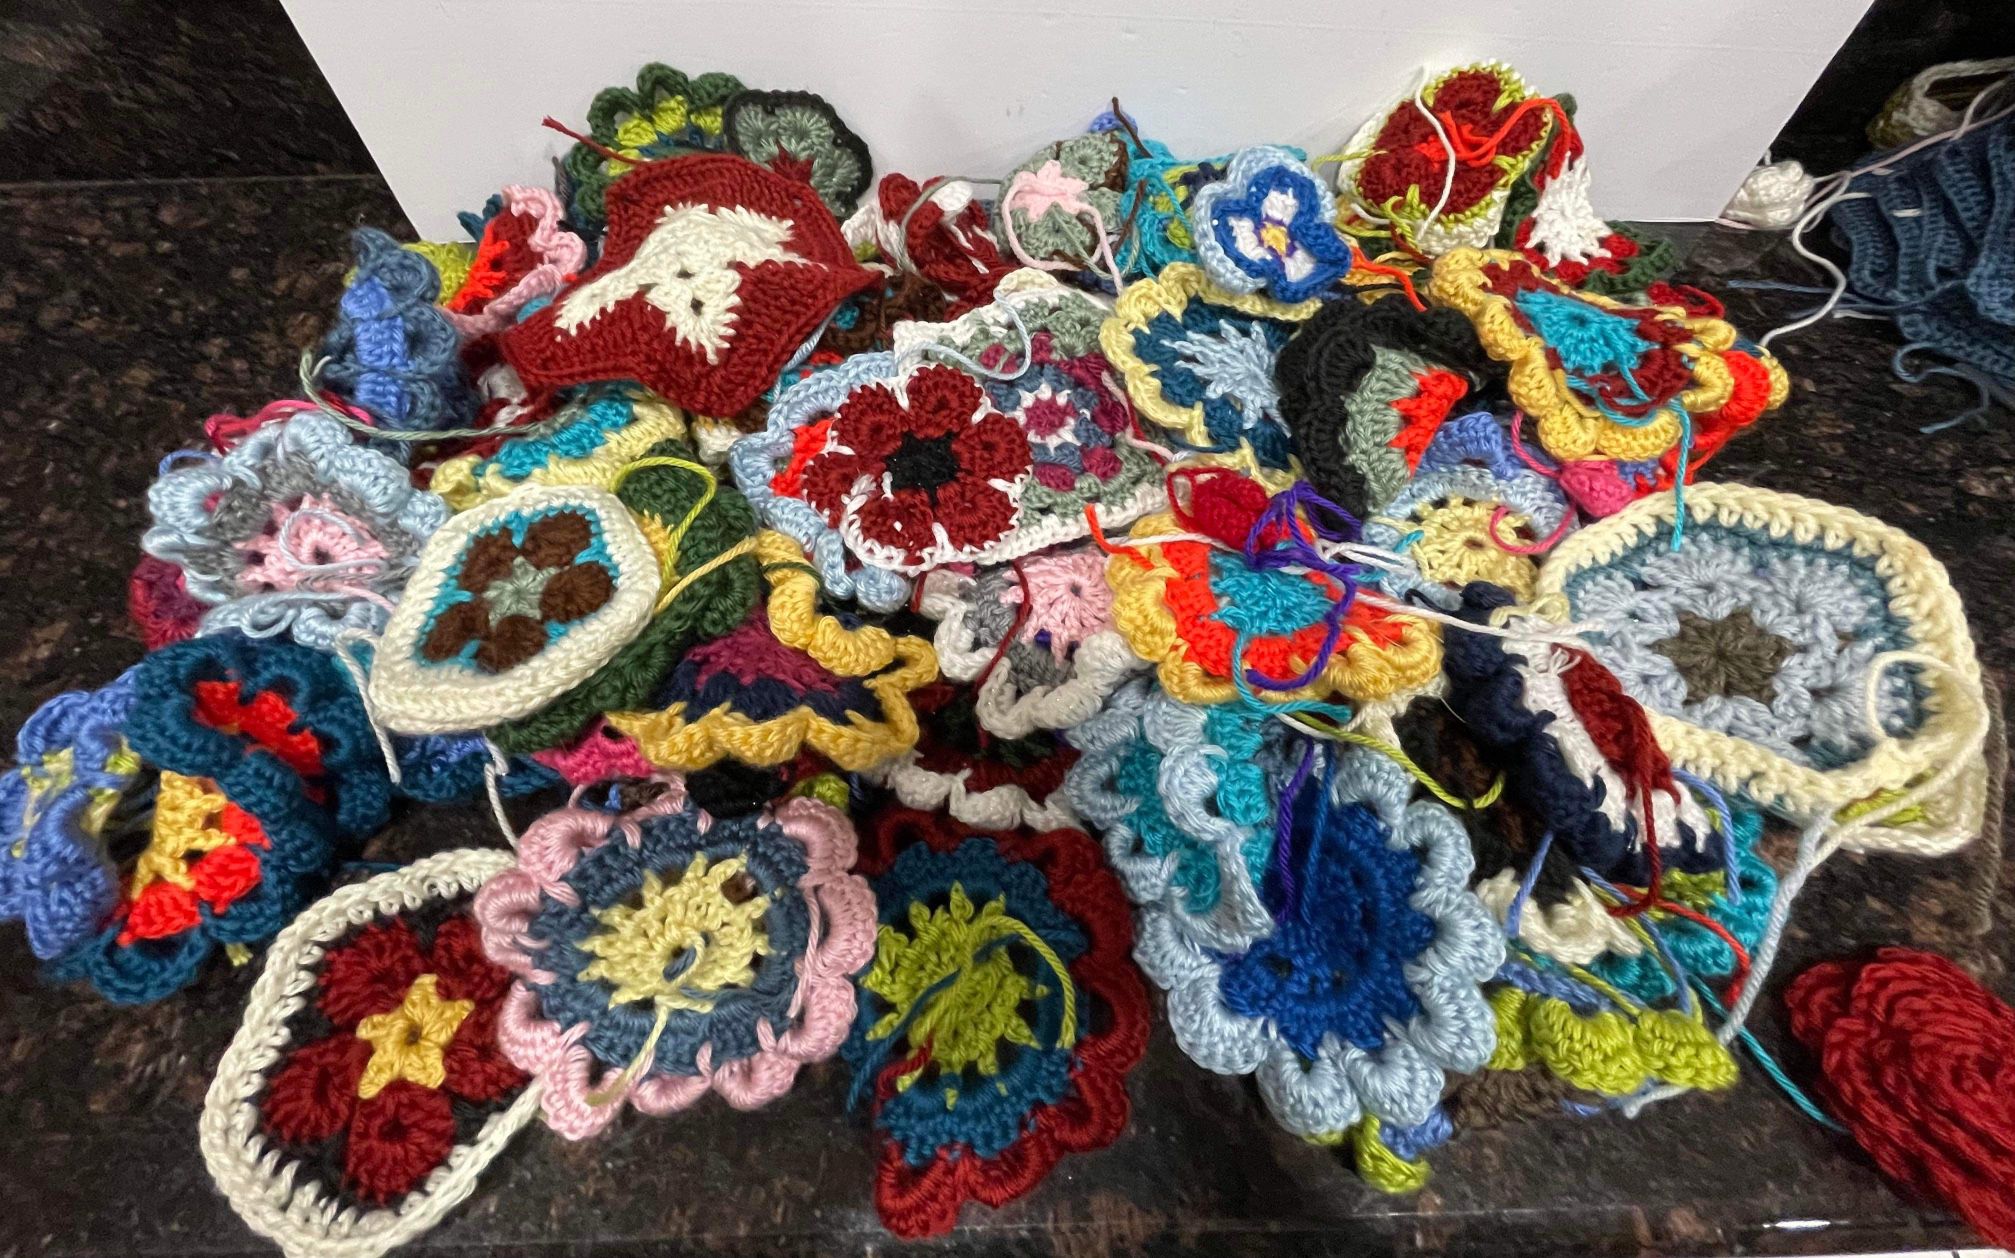 Large assortment of crochet granny squares. They are made of colorful acrylic yarn. There are approximately 100 small pieces, 50 blue/white, a finishe